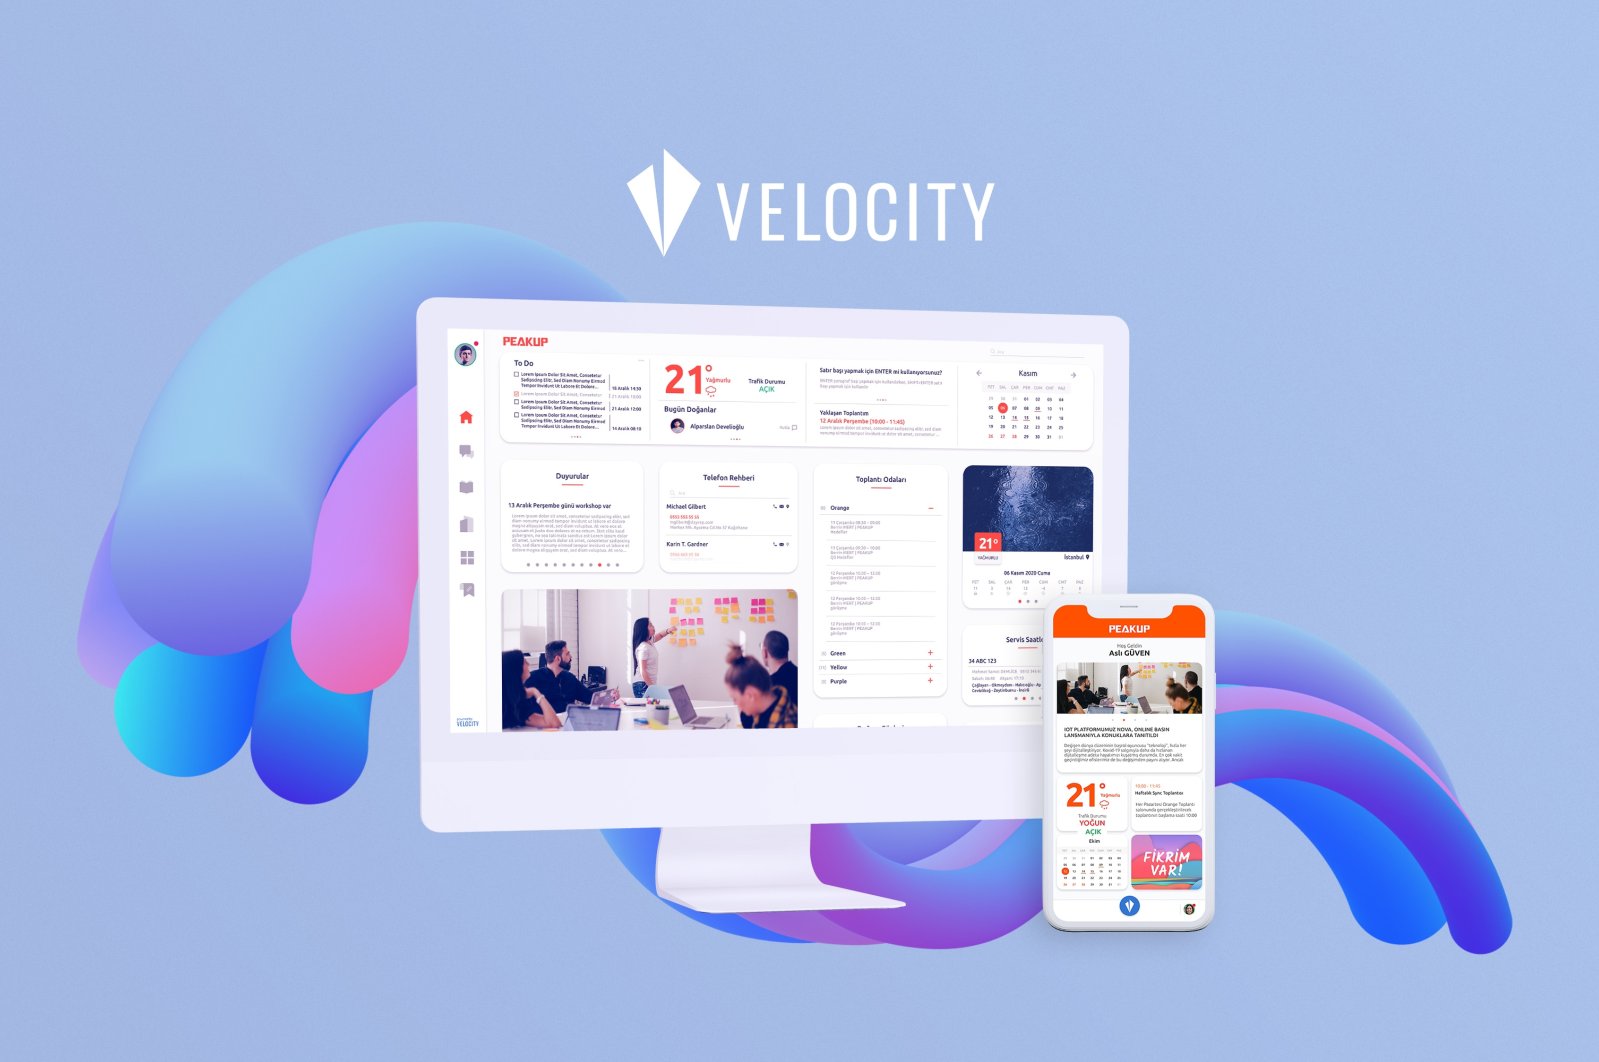 A photo shows the user interface of Velocity on a desktop computer and mobile device. (Photo courtesy of PEAKUP)